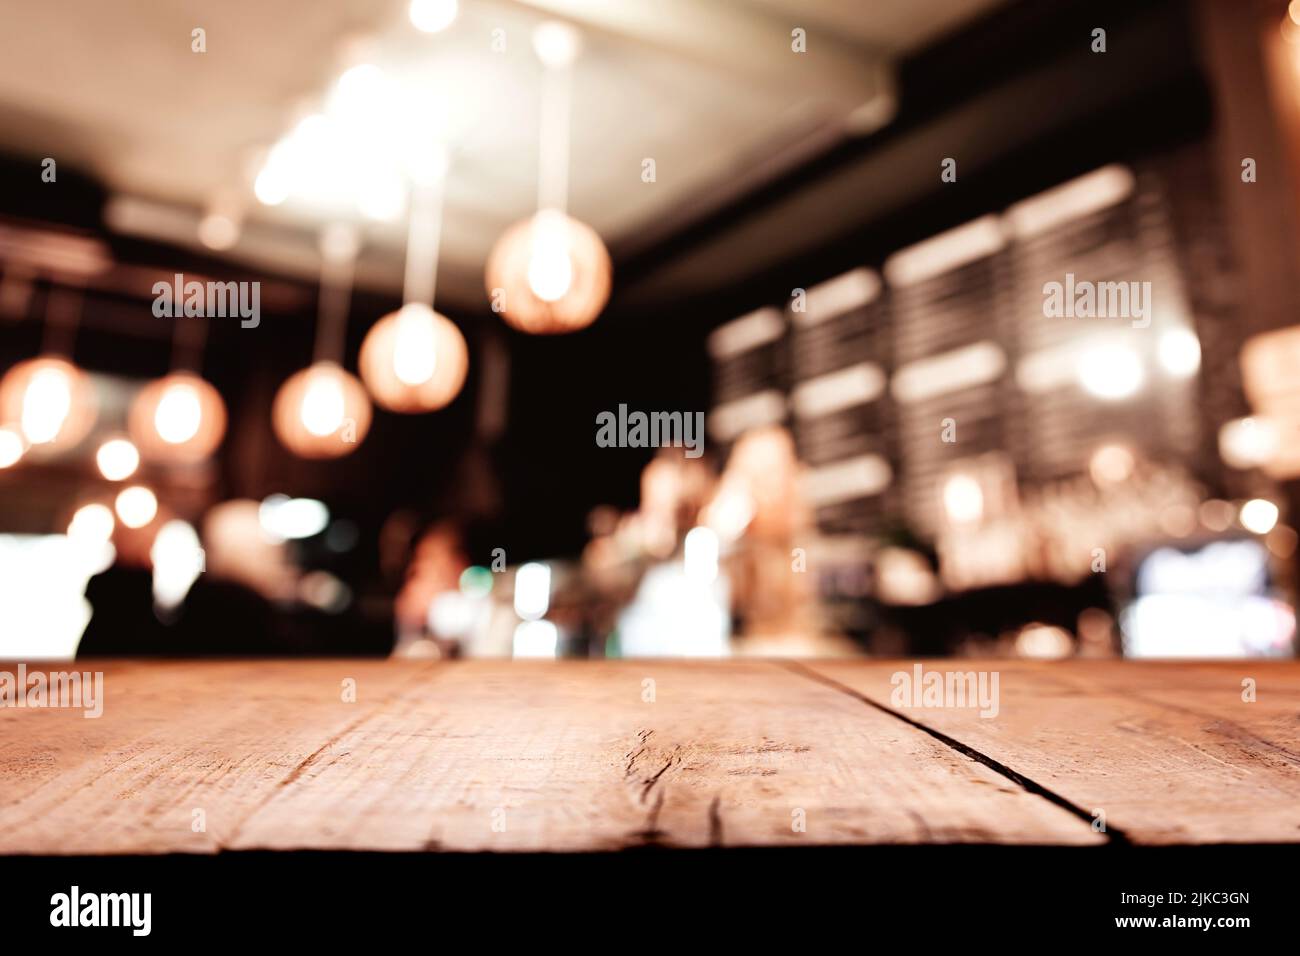 Empty blank wooden old deck table in front of abstract blurred festive background in bar, cafe, pub or restaurant with light spots and bokeh for product montage display of product. Copy space area Stock Photo